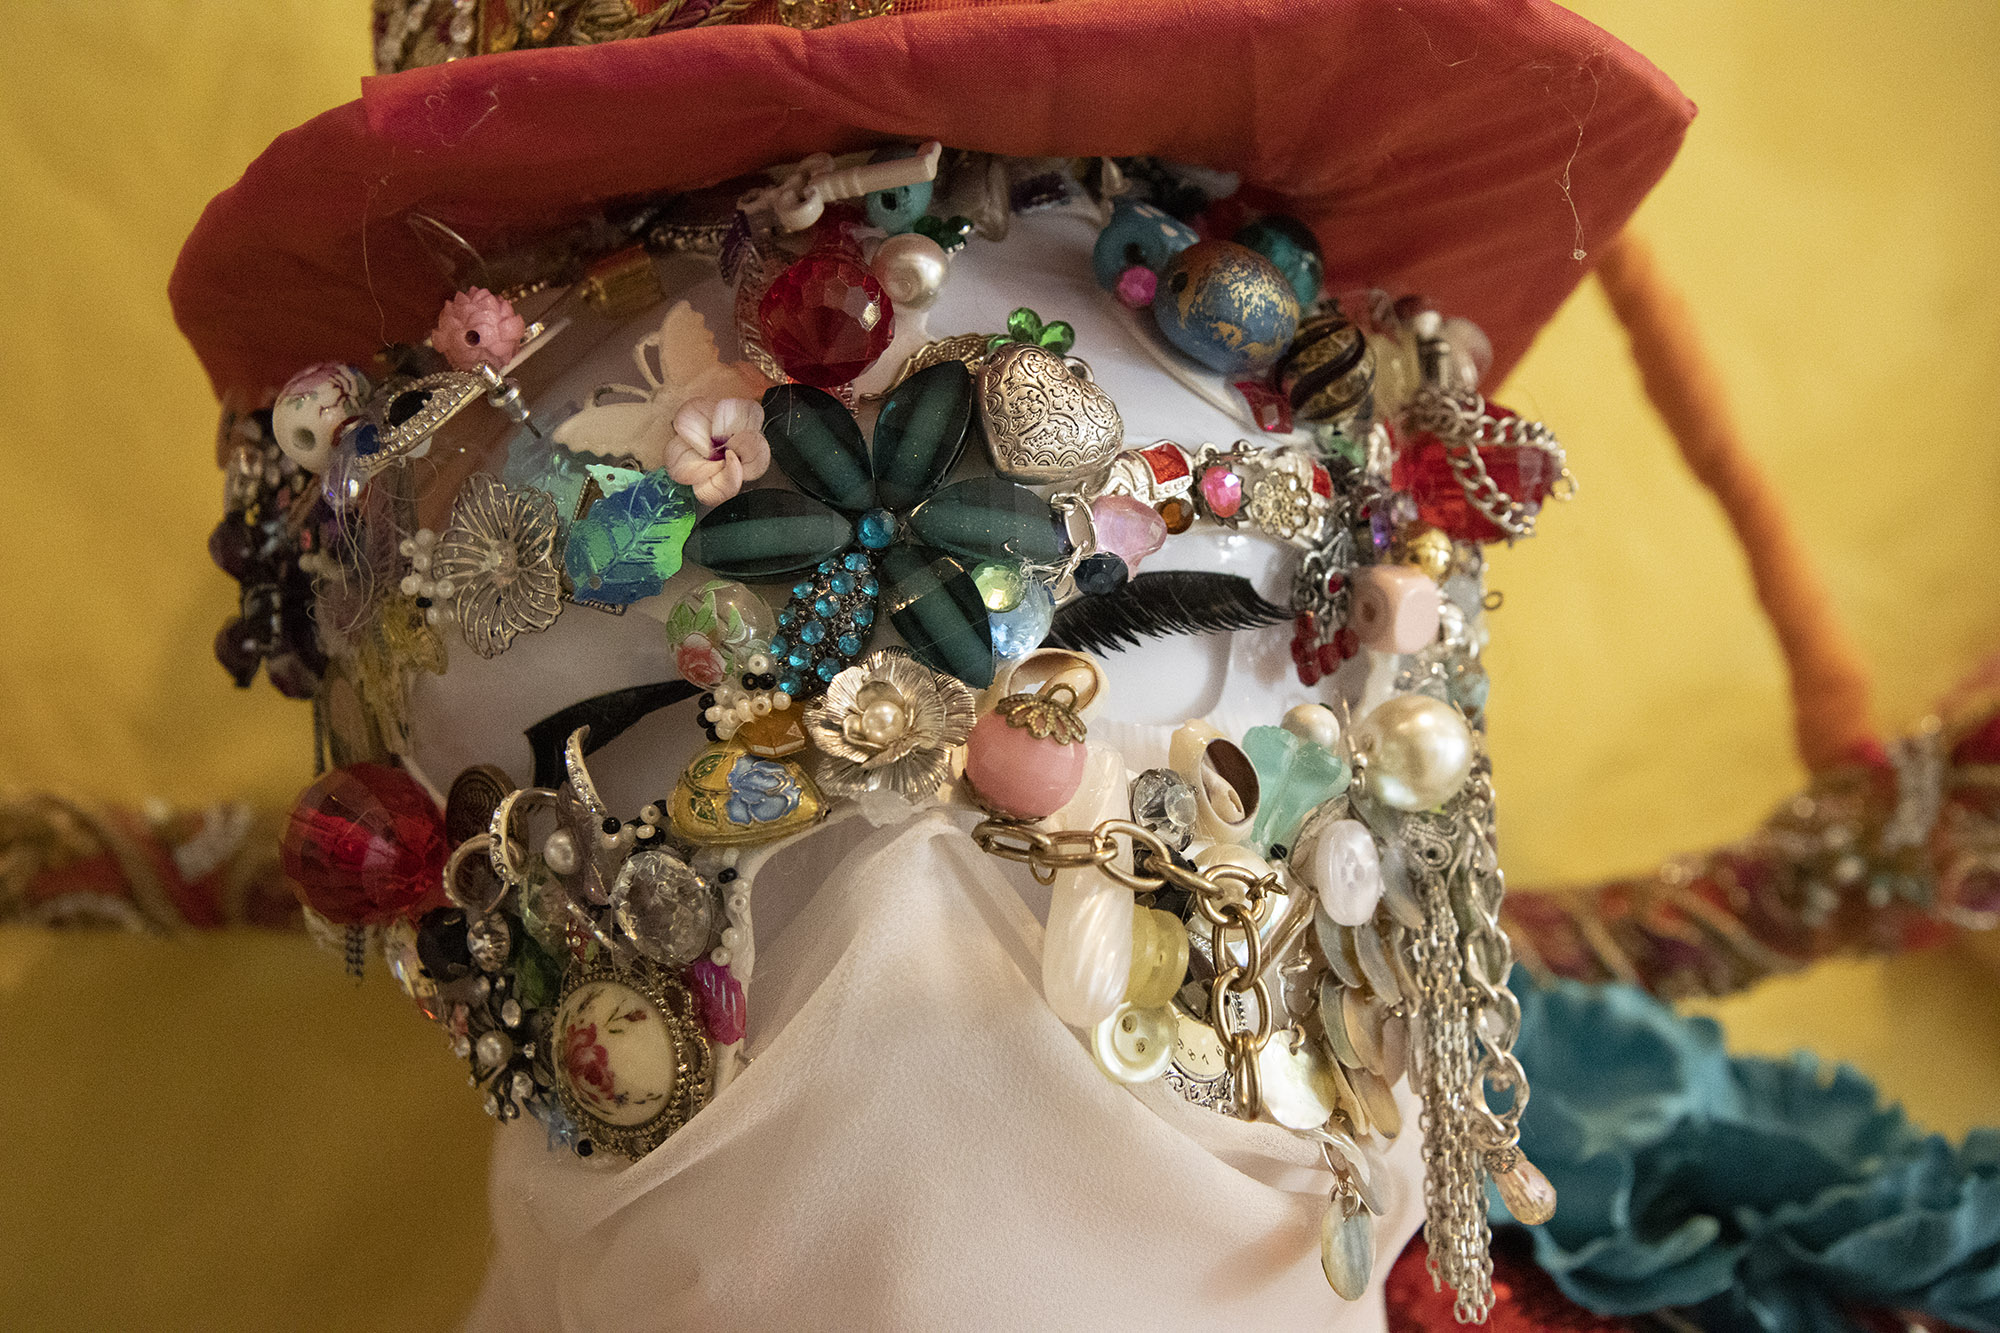 A close up of the face of a white mannequin covered with a mask, decorated with buttons, beads, gems, chains and sequins. False eyelashes stuck to the sculpture are visible in cut-out areas of the mask, and the nose is covered with a light, white fabric.